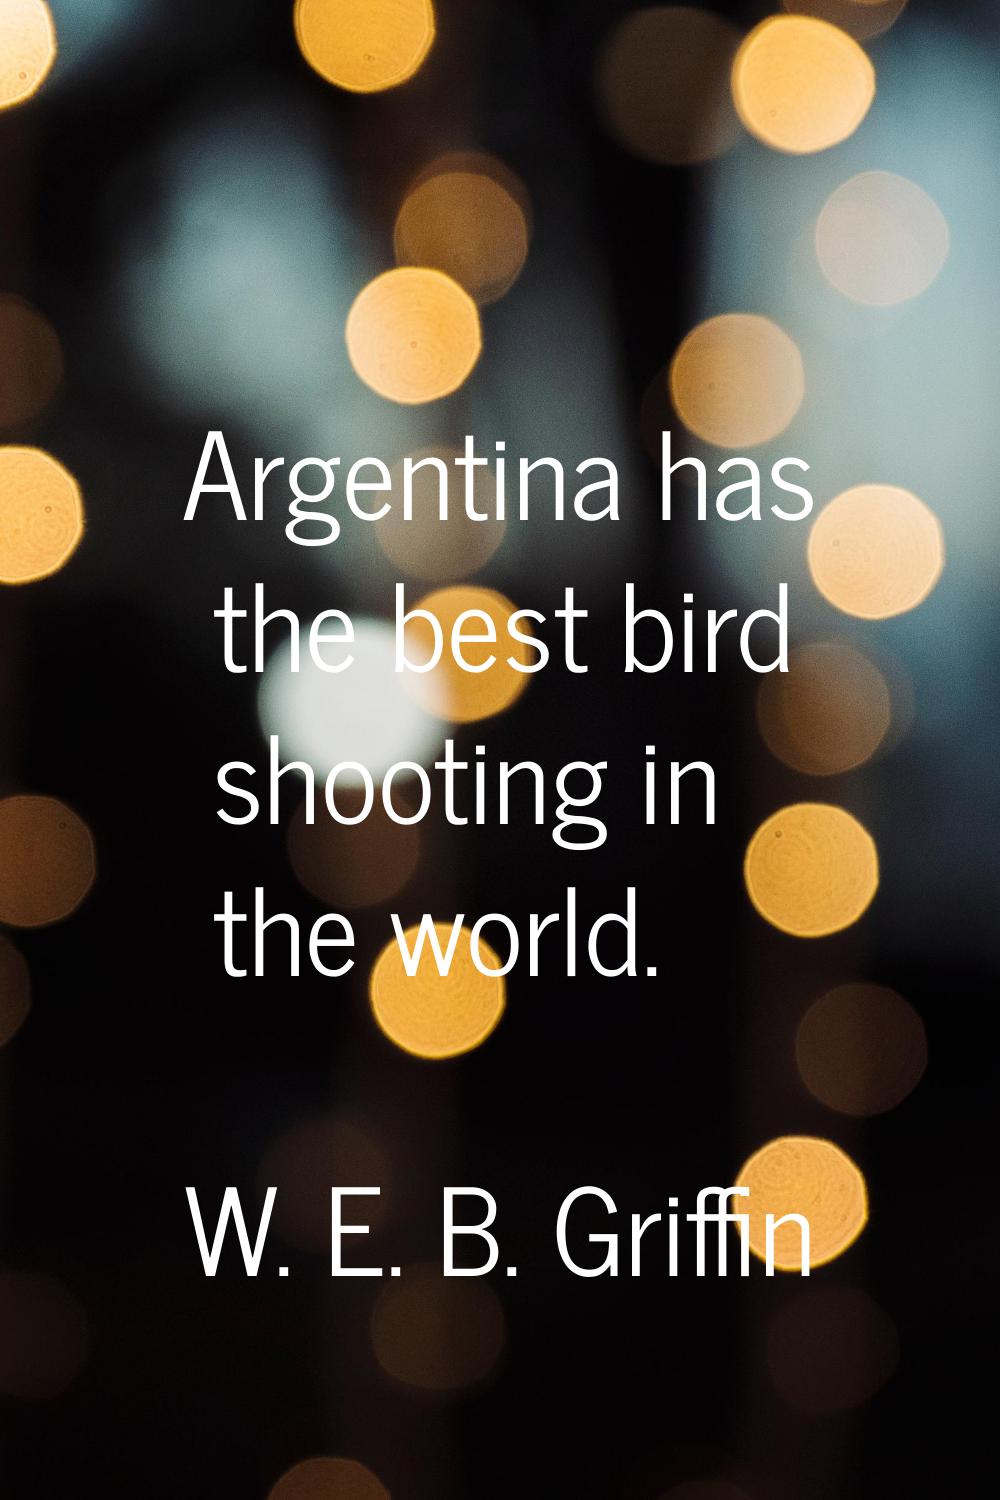 Argentina has the best bird shooting in the world.